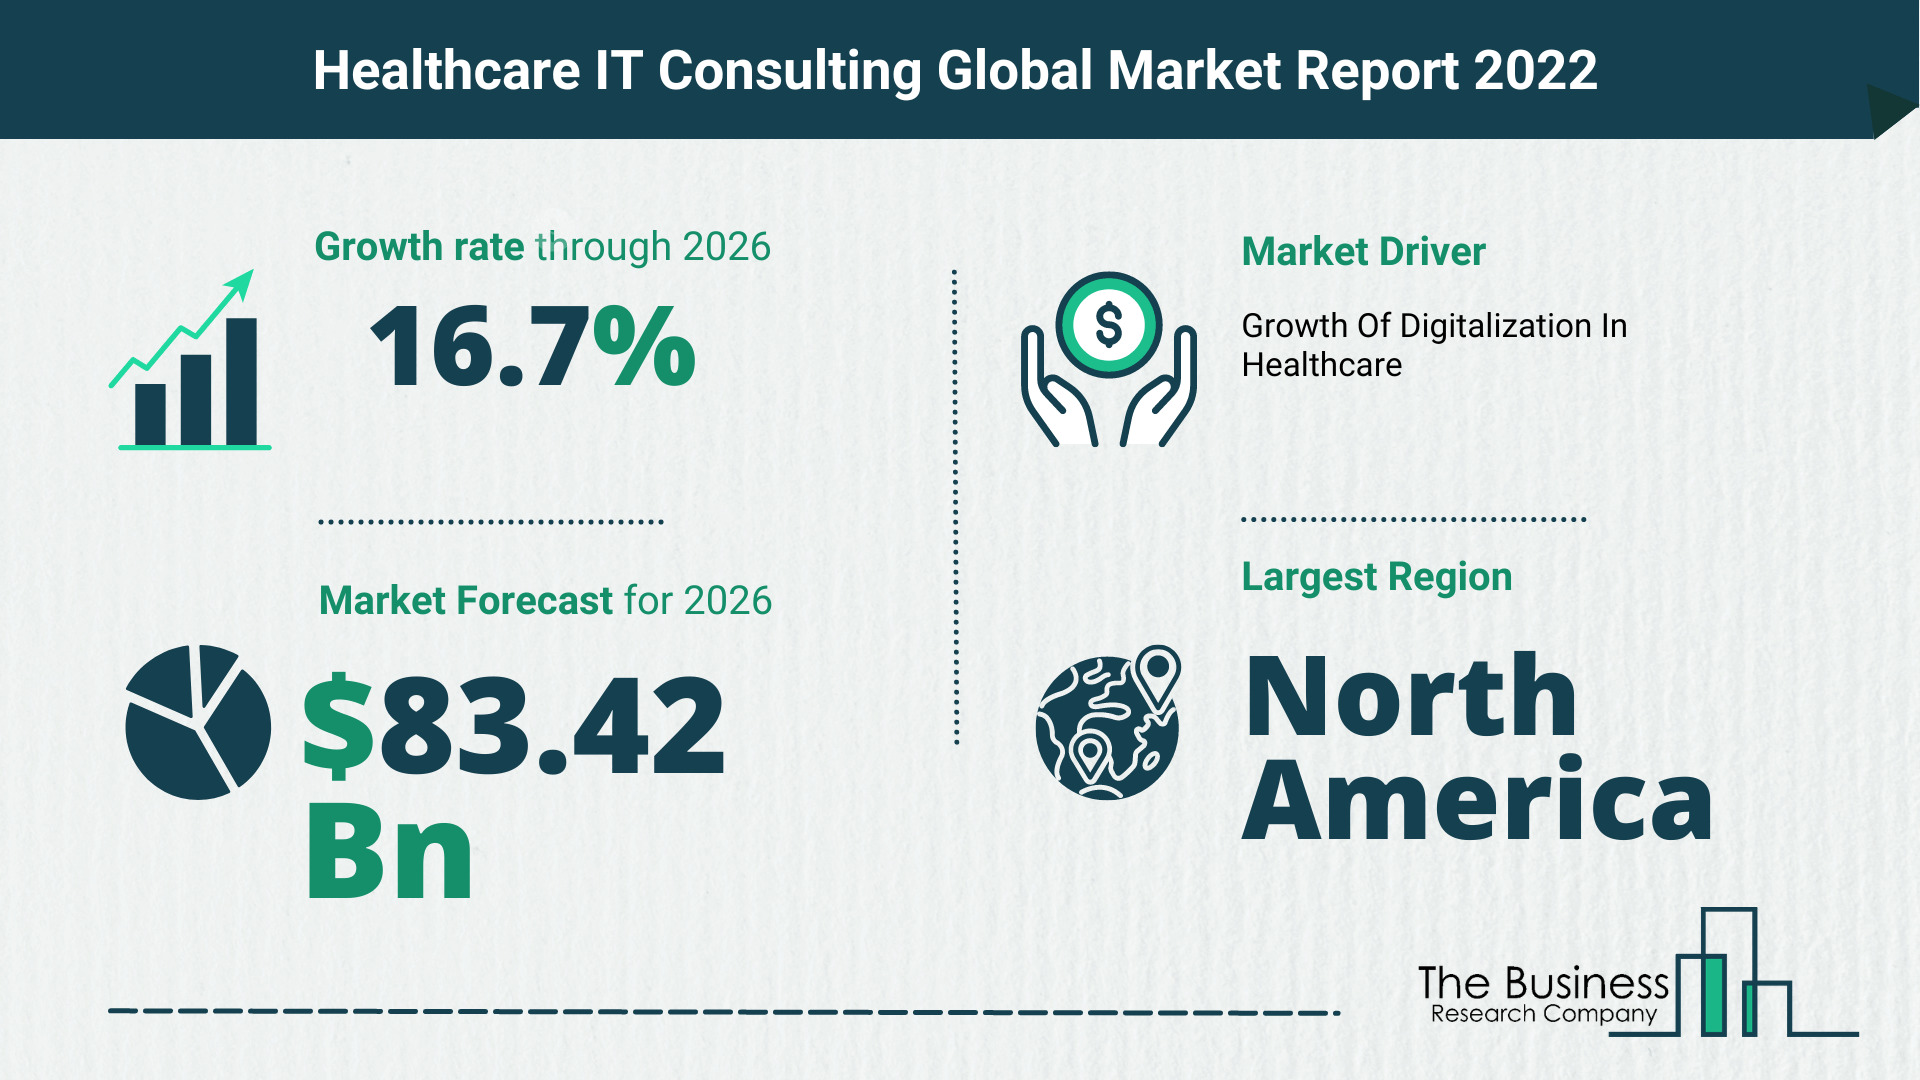 What Is The Healthcare IT Consulting Market Overview In 2022?